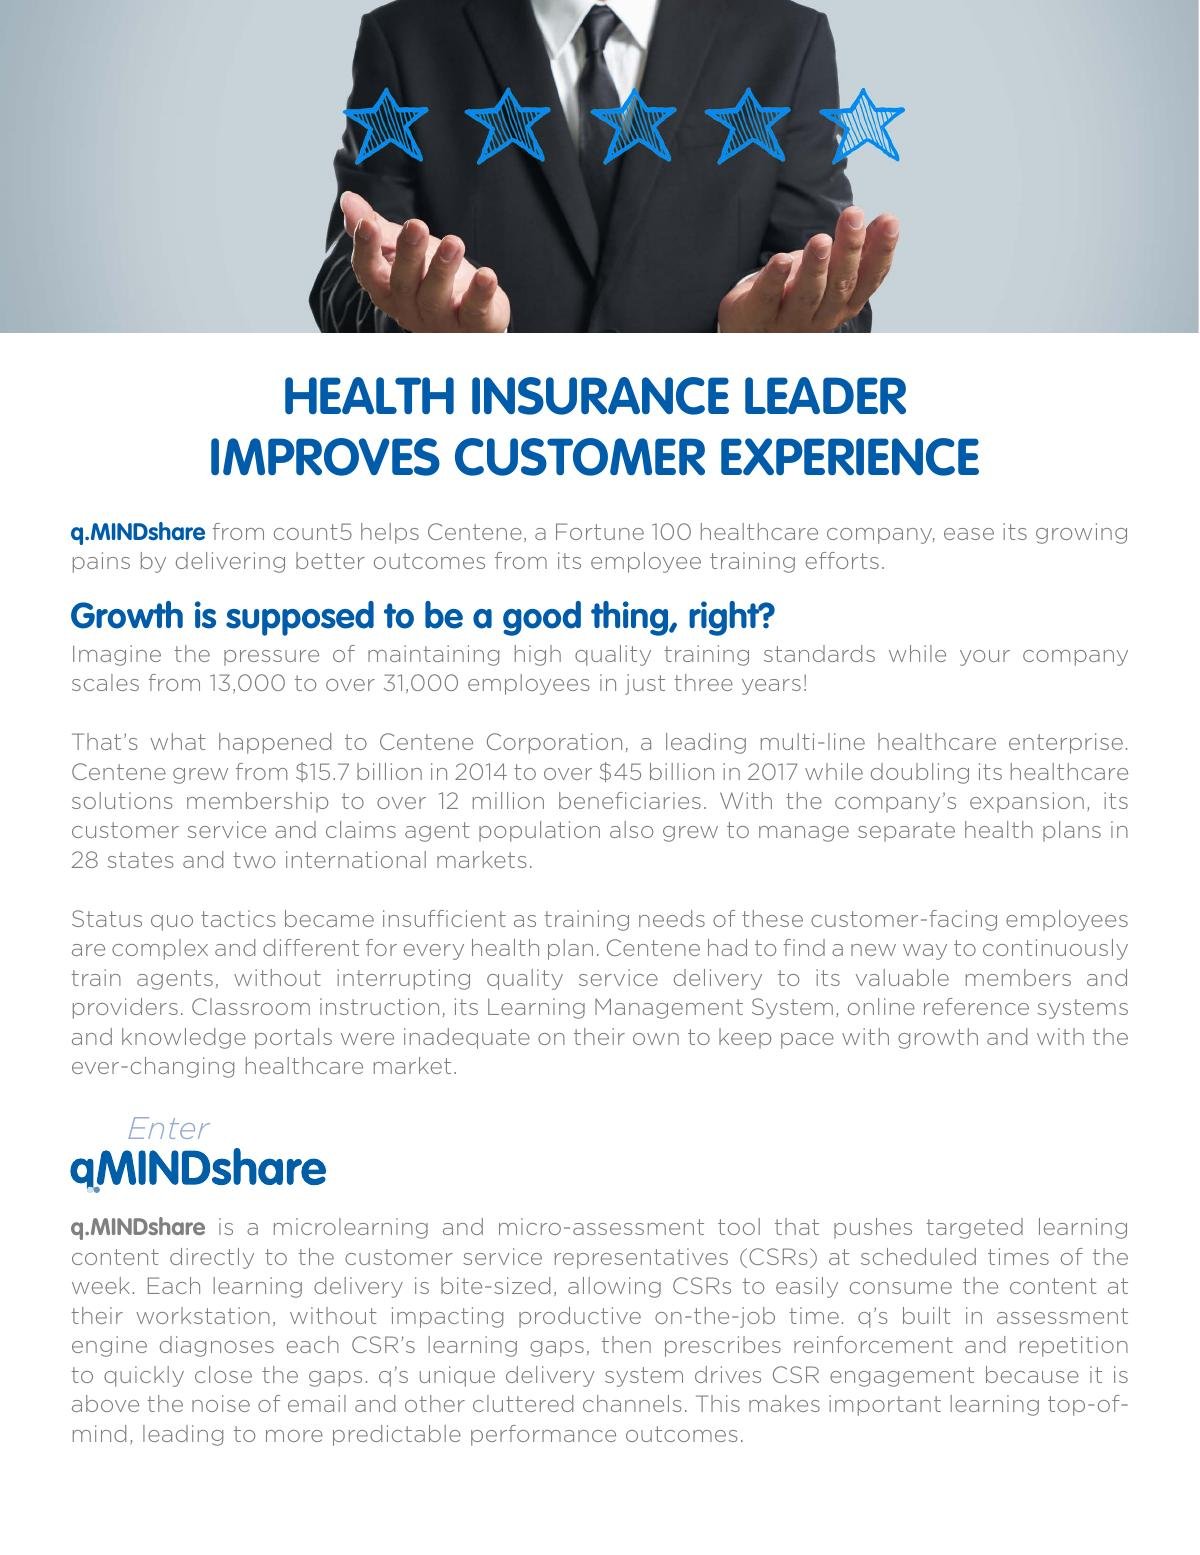 Health Insurance Leader Improves Training Outcomes